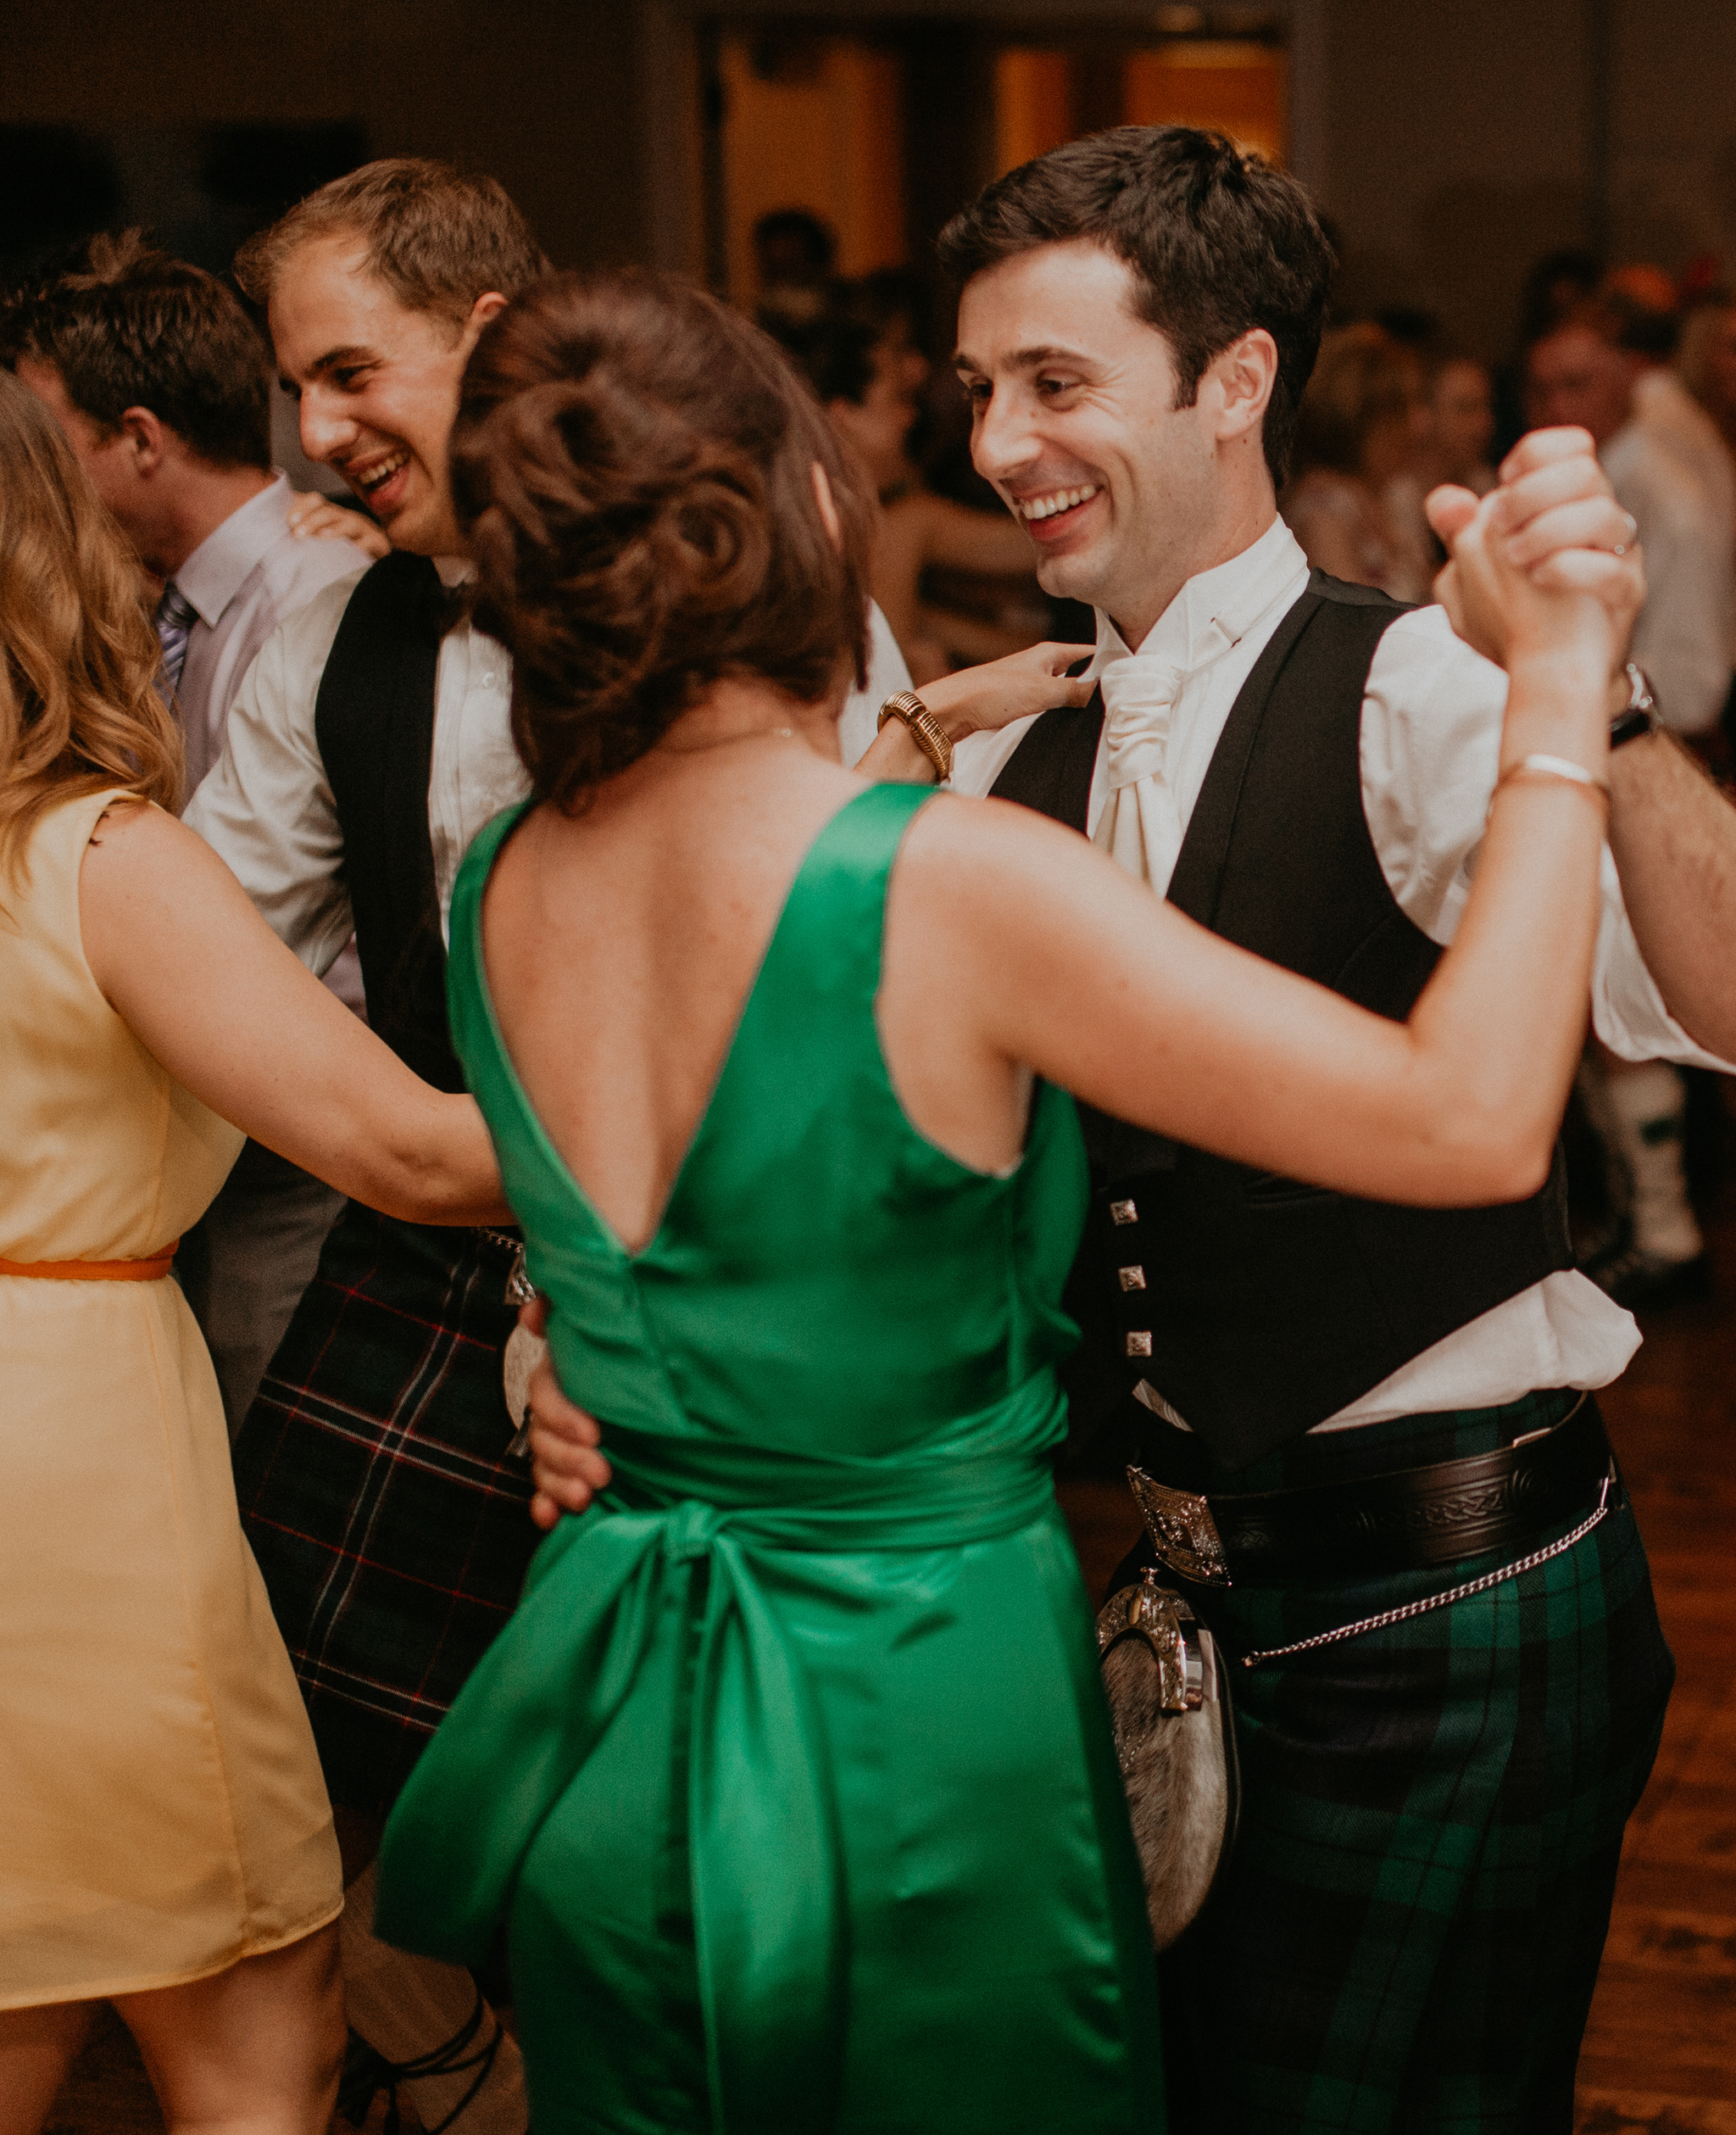 Groom dances with bridesmaid at wedding reception candid documentary photograph